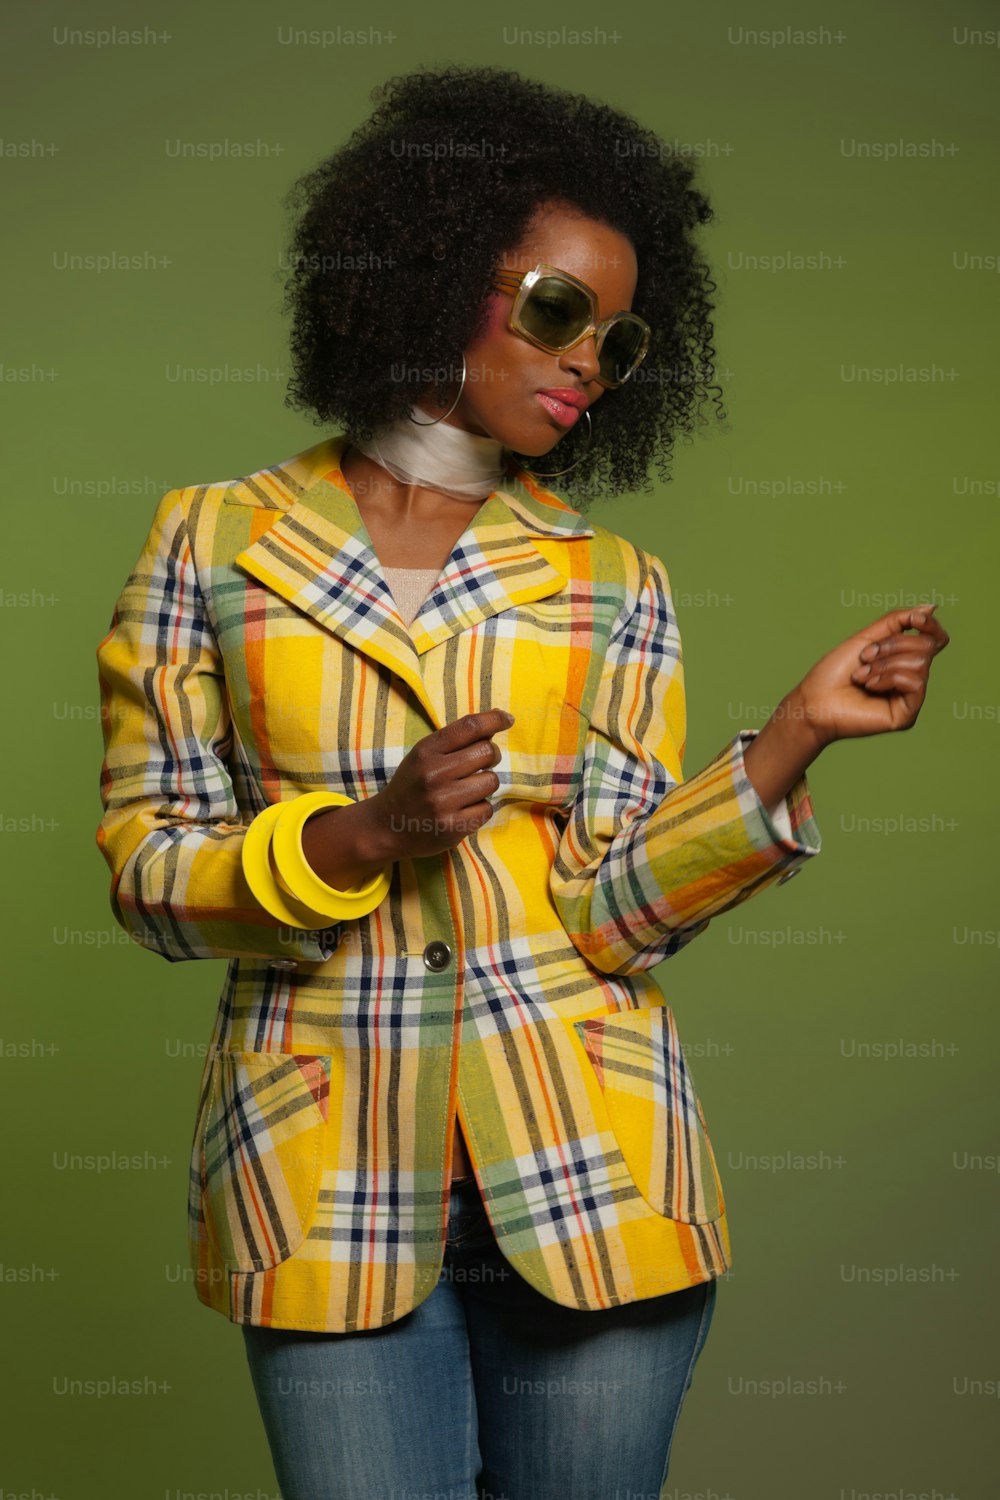 Dancing retro 70s fashion african woman with sunglasses. Yellow jacket and green background.